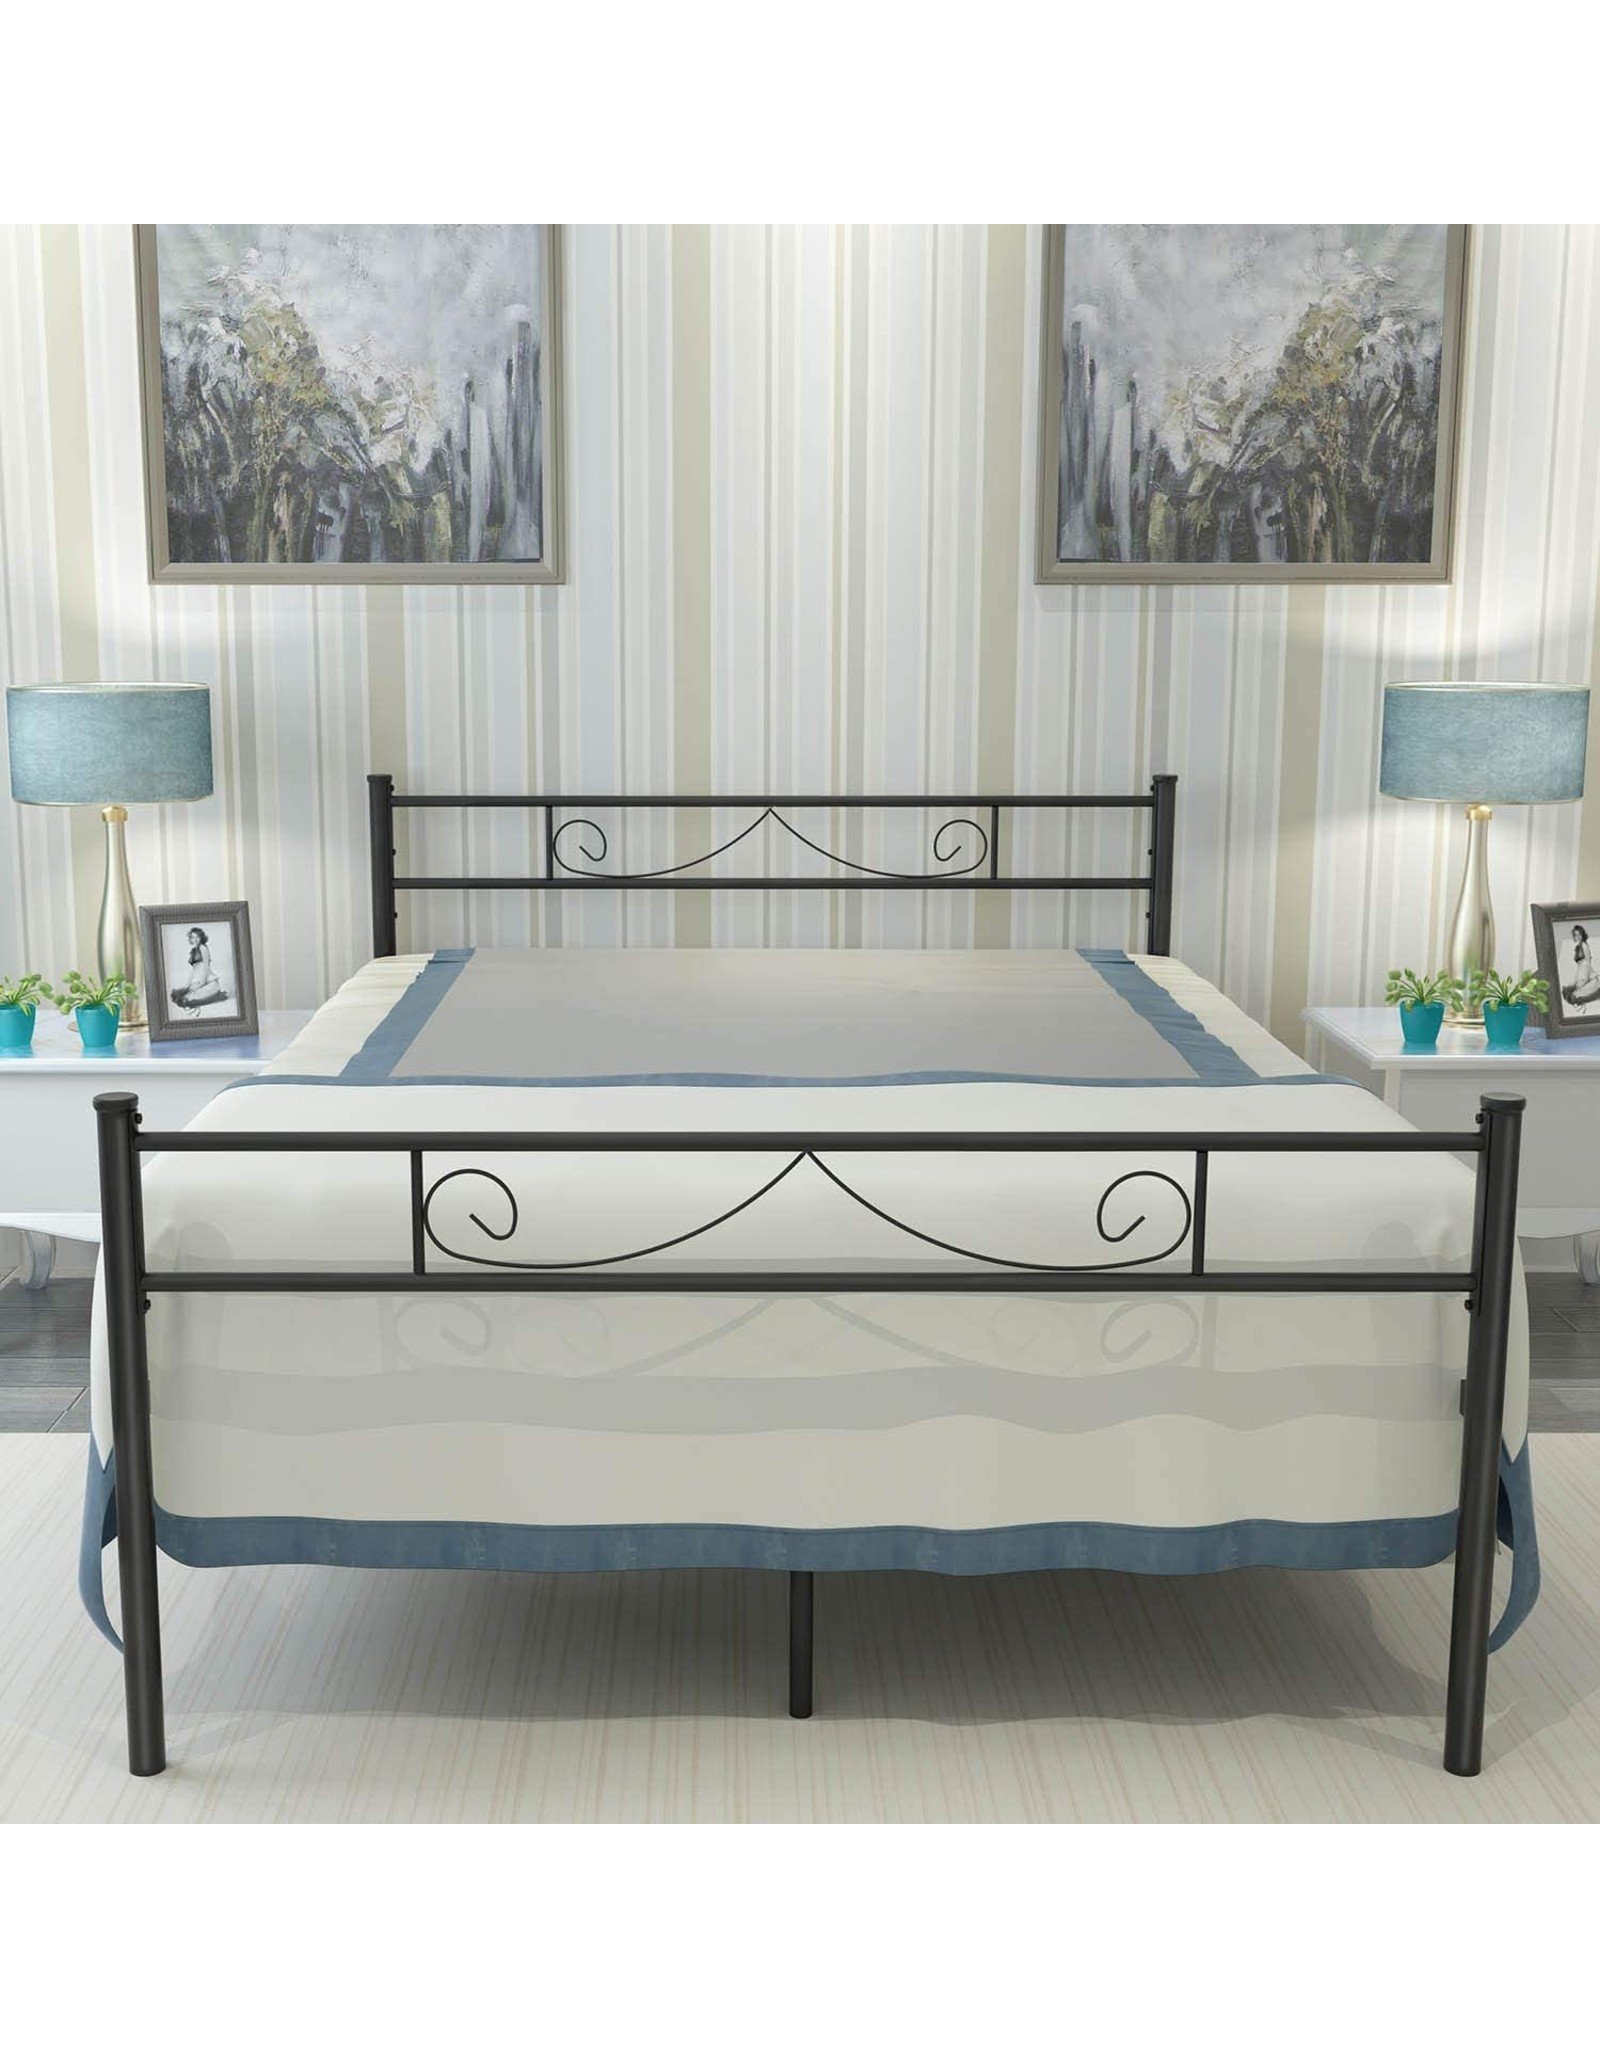 Haageep 18 Inch Queen Bed Frame, Queen Bed Frame With Headboard Box Spring Required